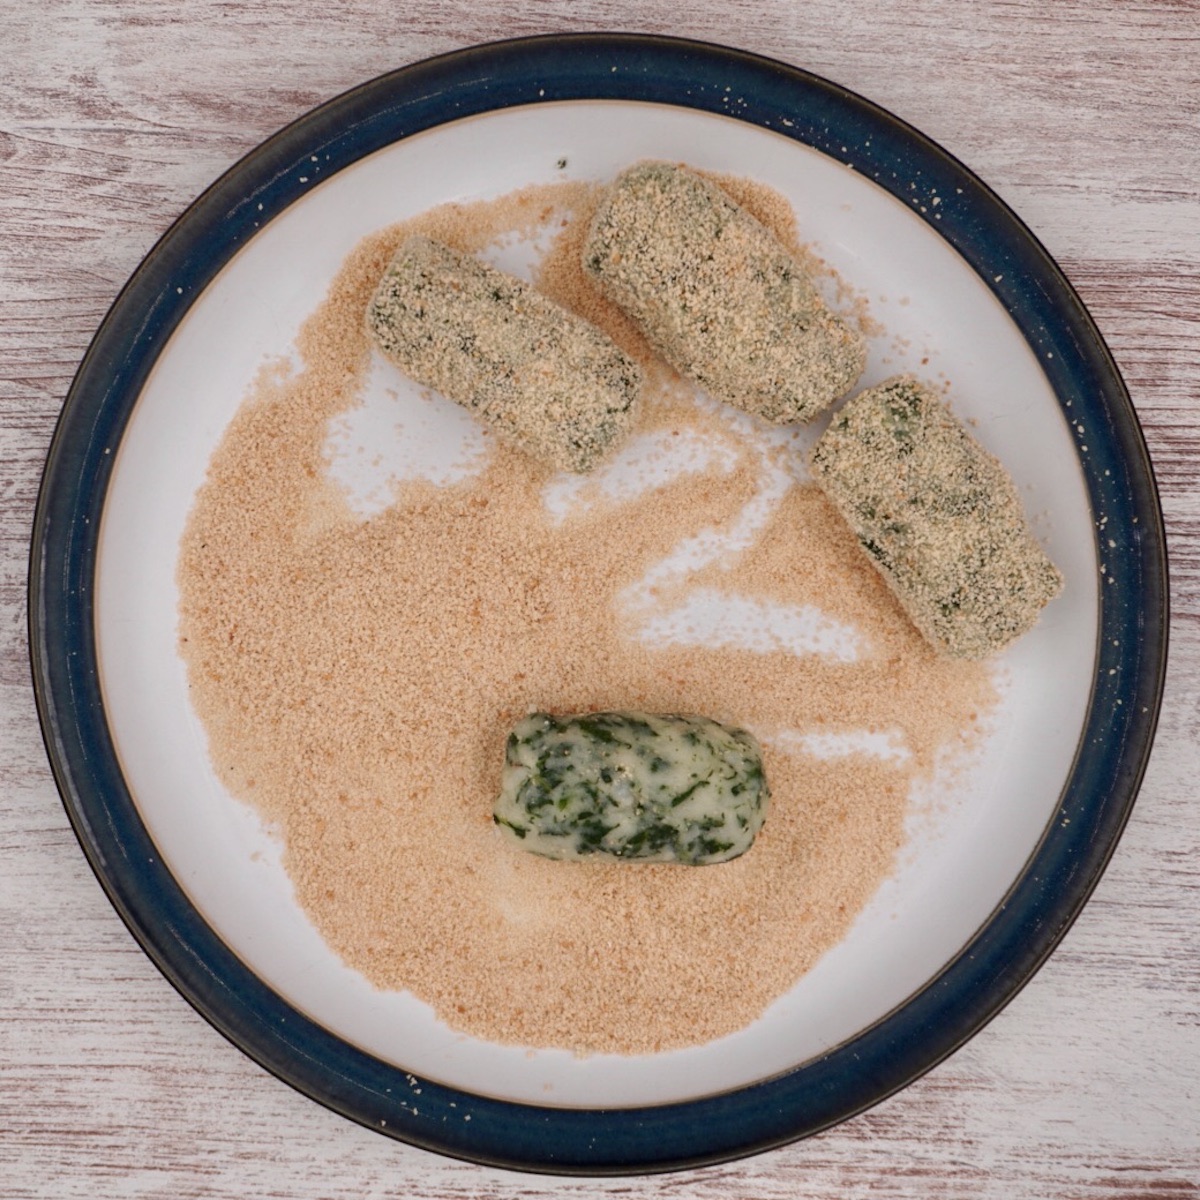 Coating spinach croquettes in breadcrumbs